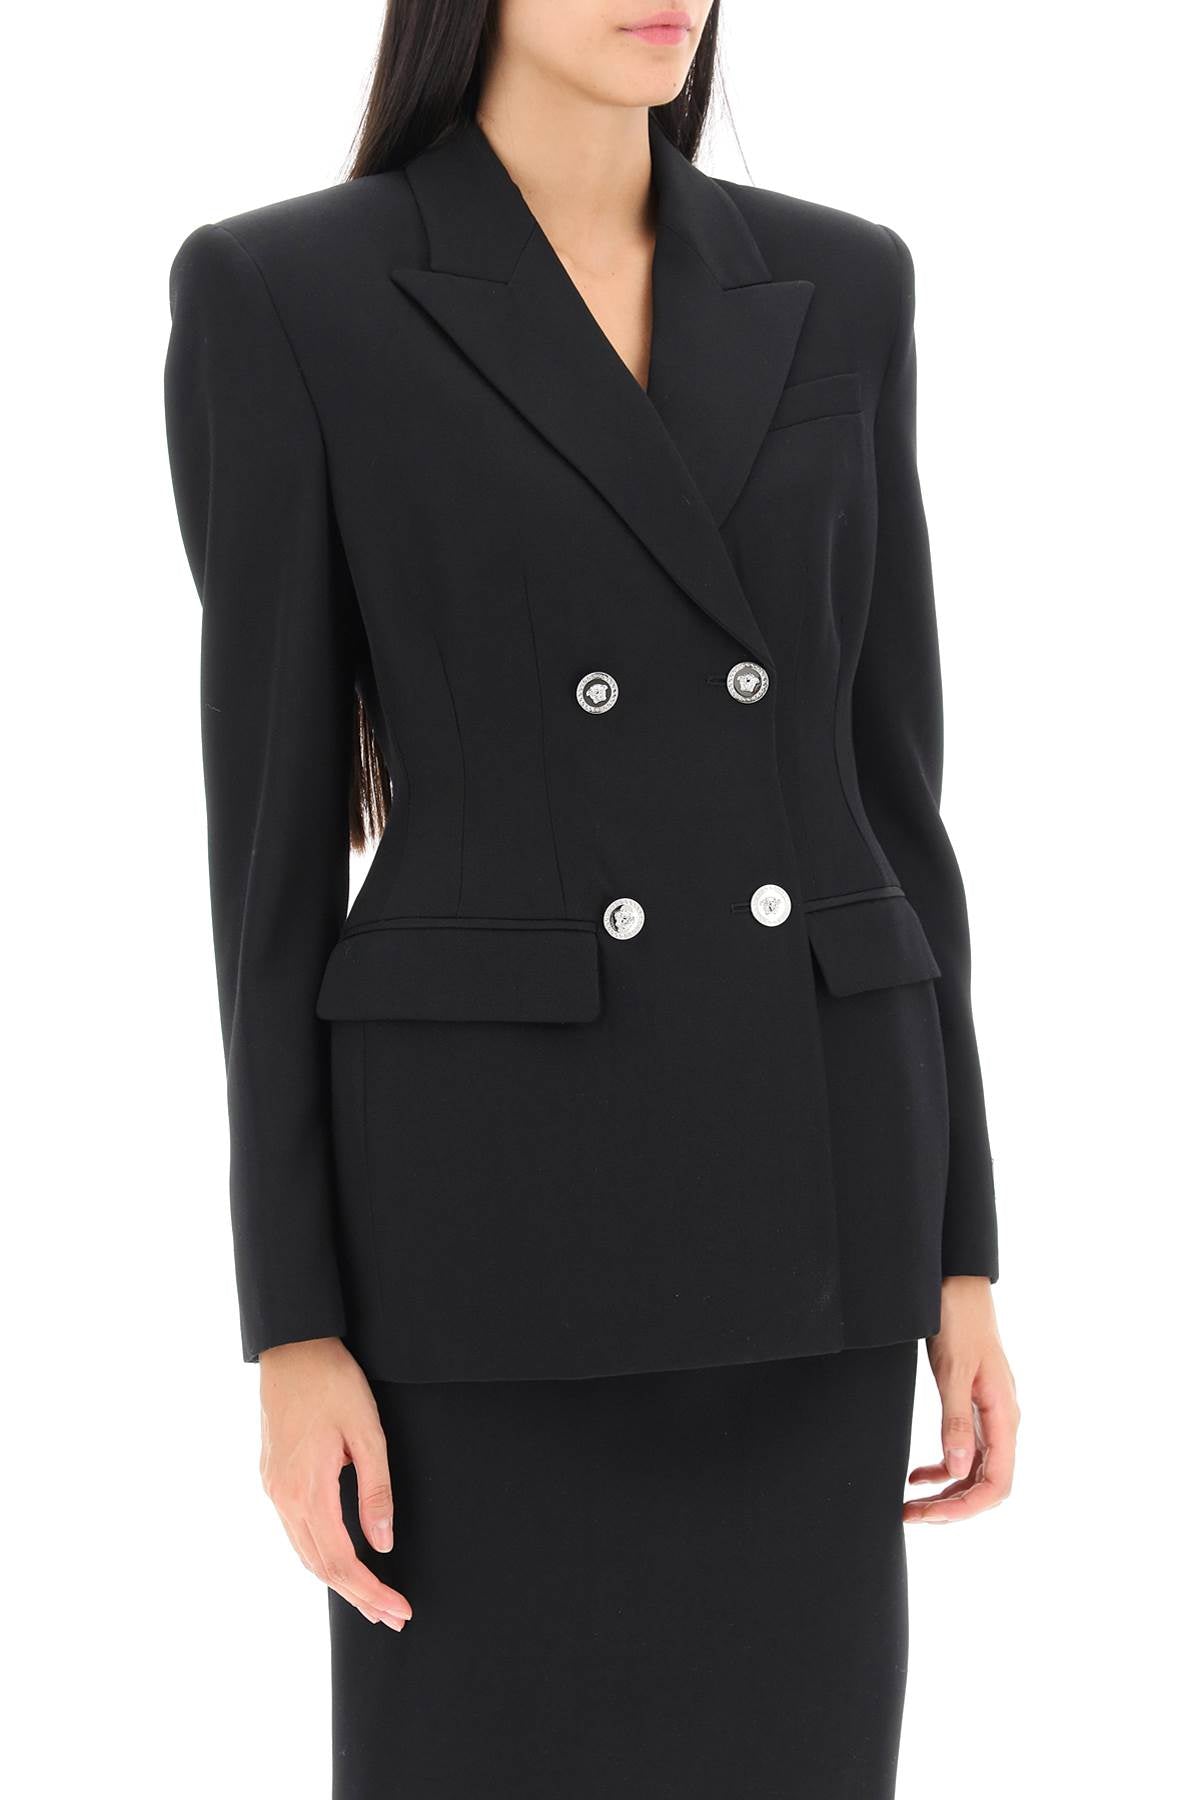 VERSACE Sculpted Hourglass Double-Breasted Blazer in Black for Women